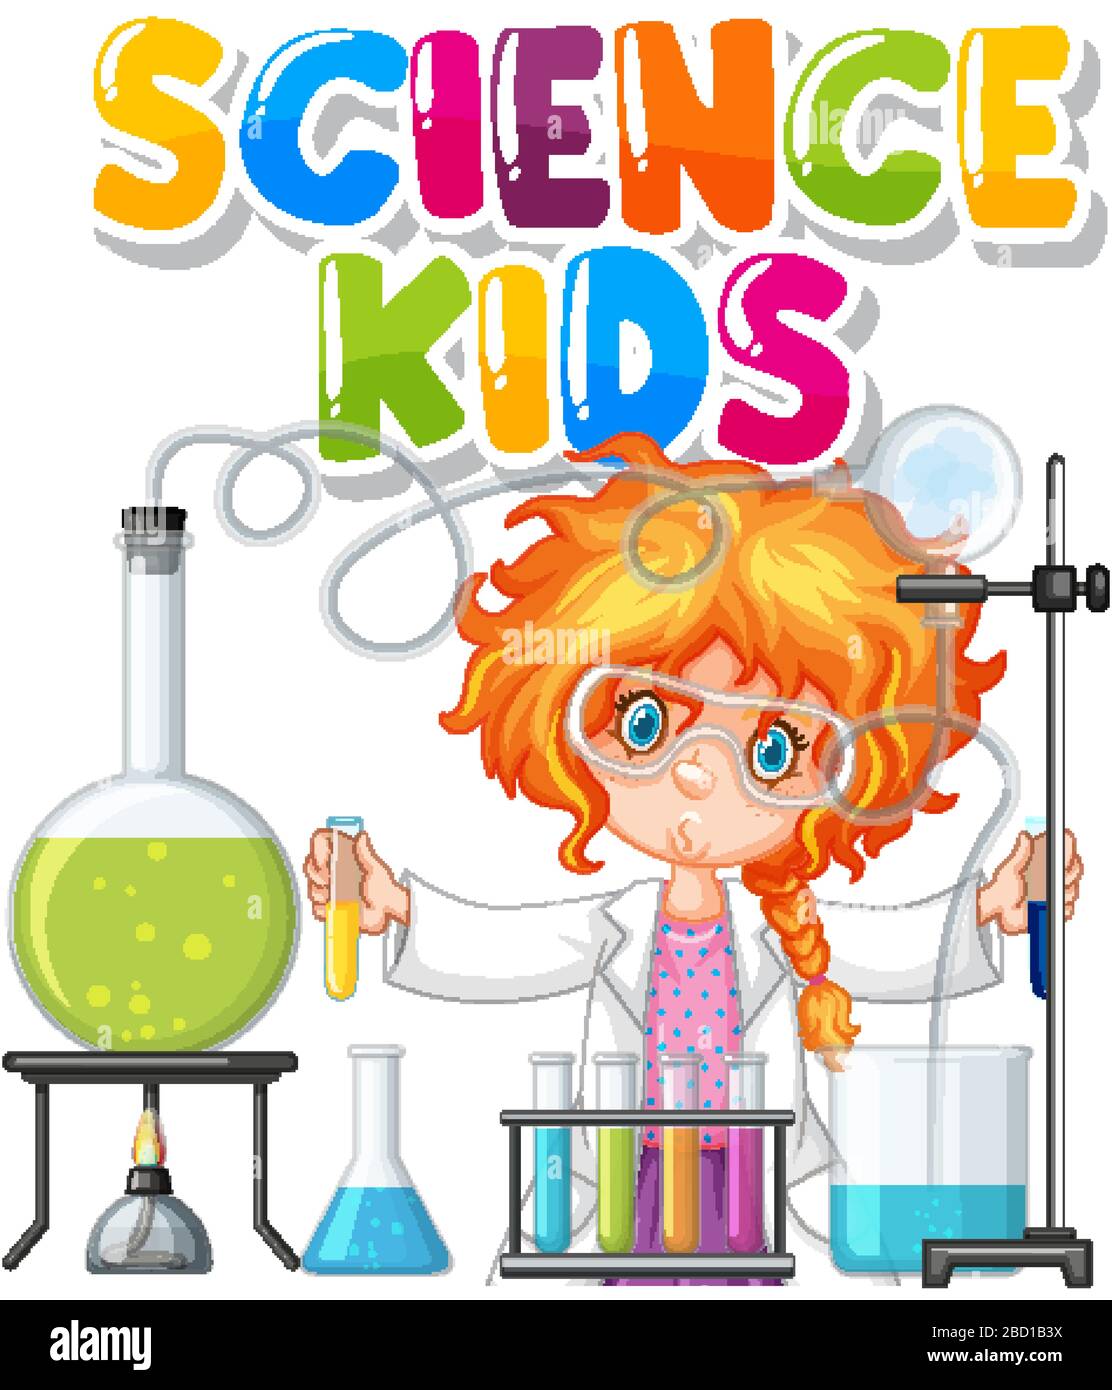 Font design for word science kids with girl in science lab illustration Stock Vector